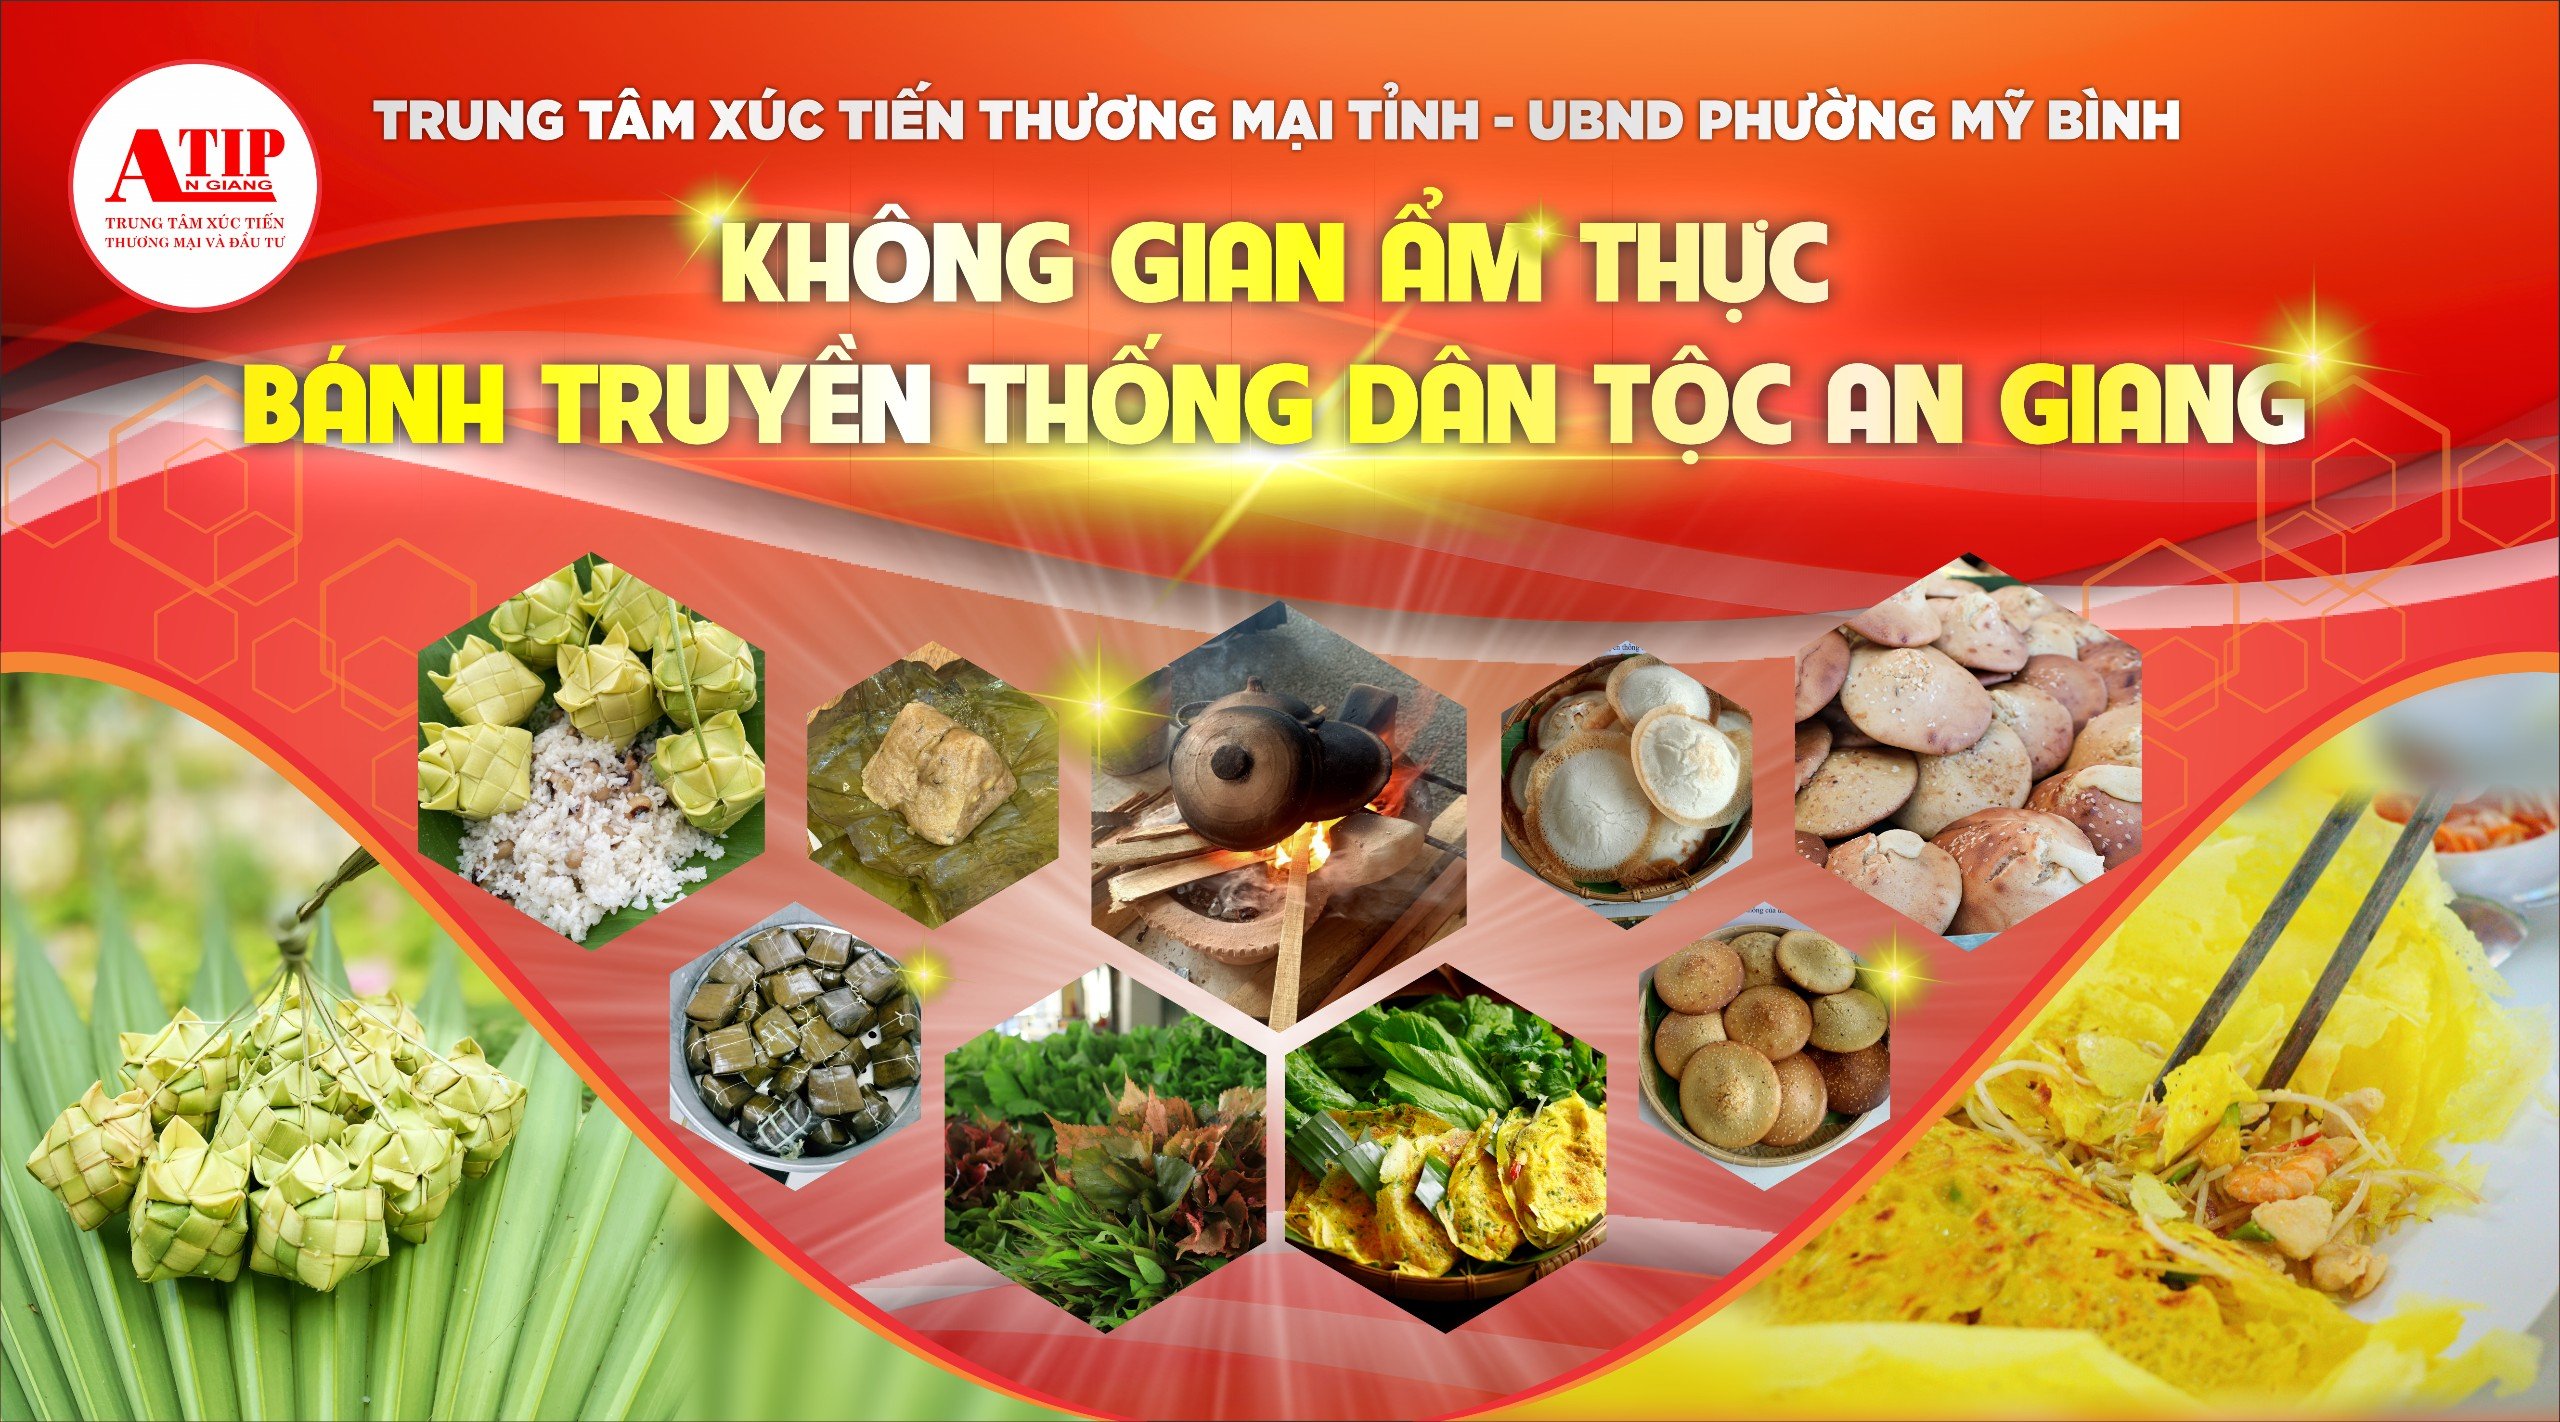 Culinary space Traditional ethnic cakes of An Giang province